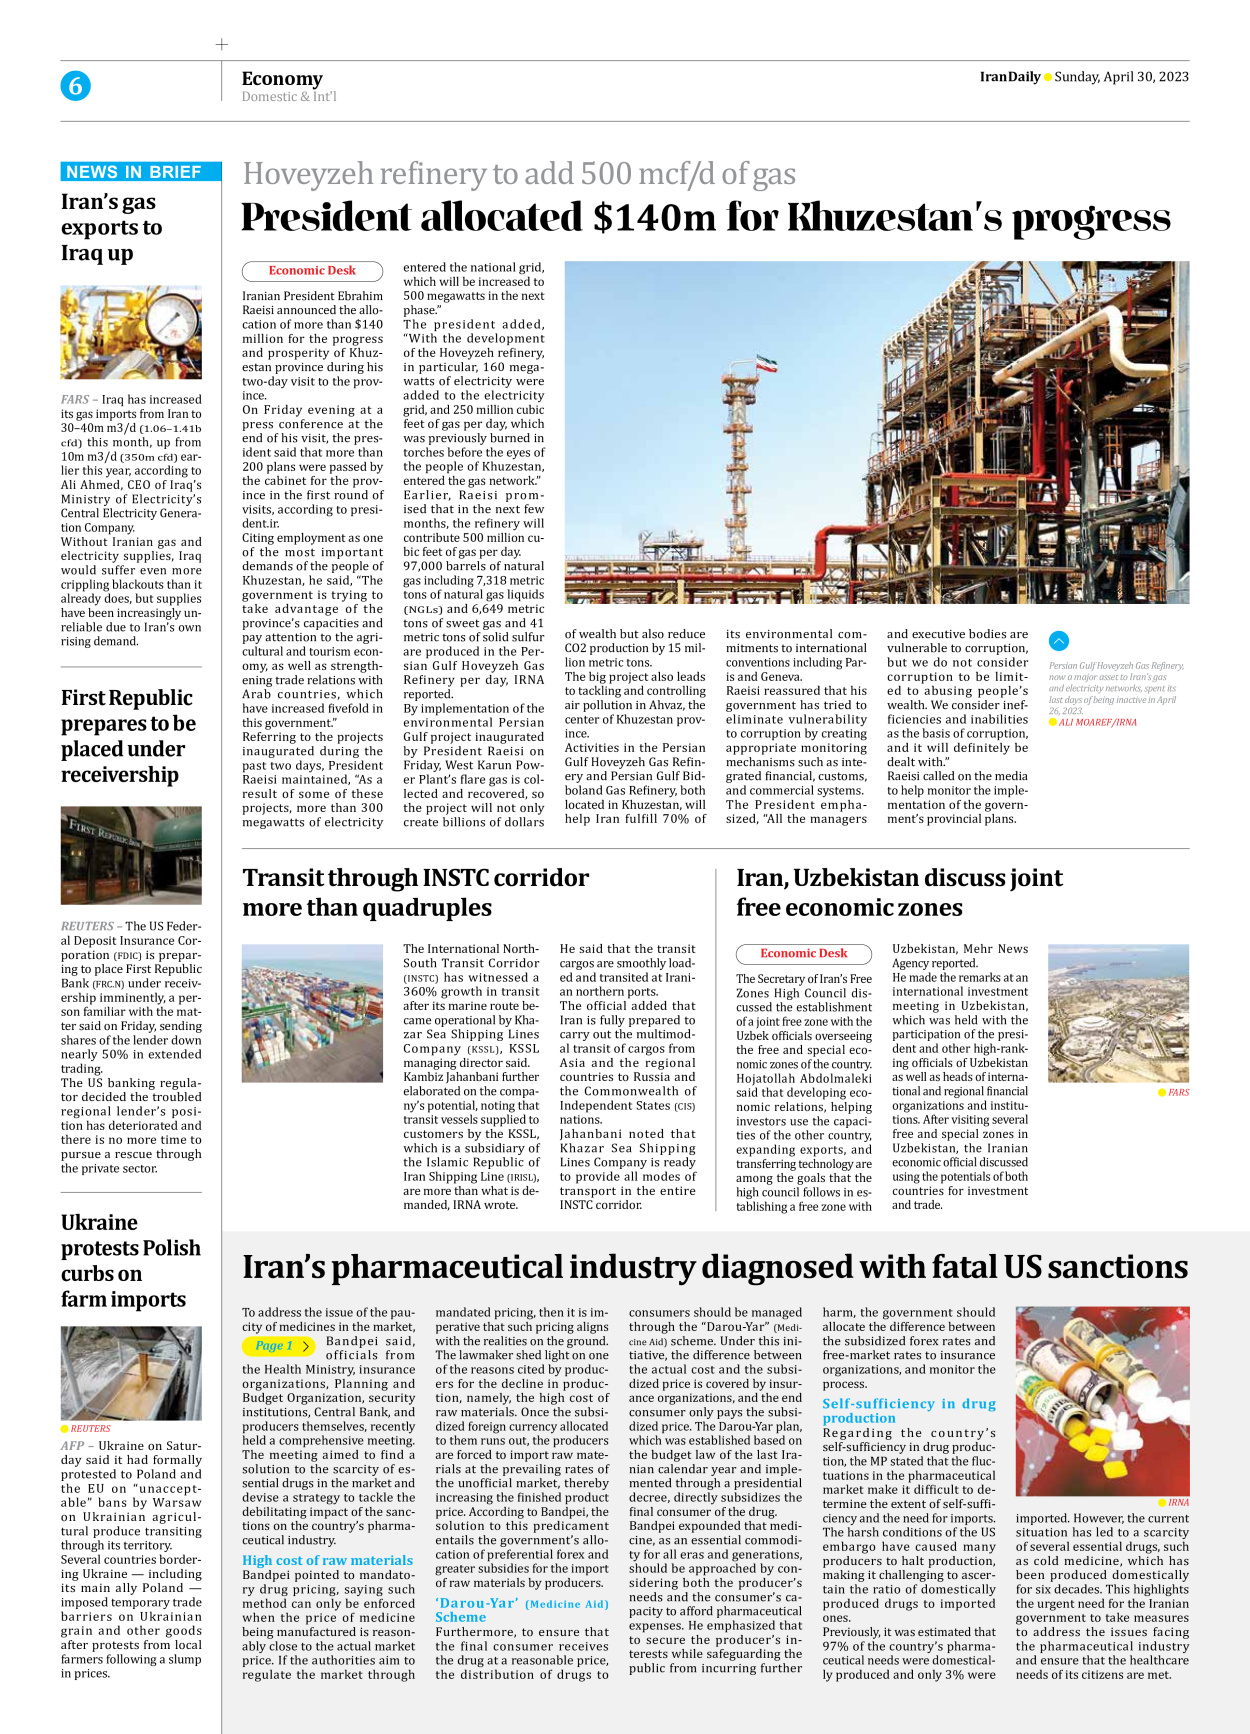 Iran Daily - Number Seven Thousand Two Hundred and Seventy Nine - 30 April 2023 - Page 6